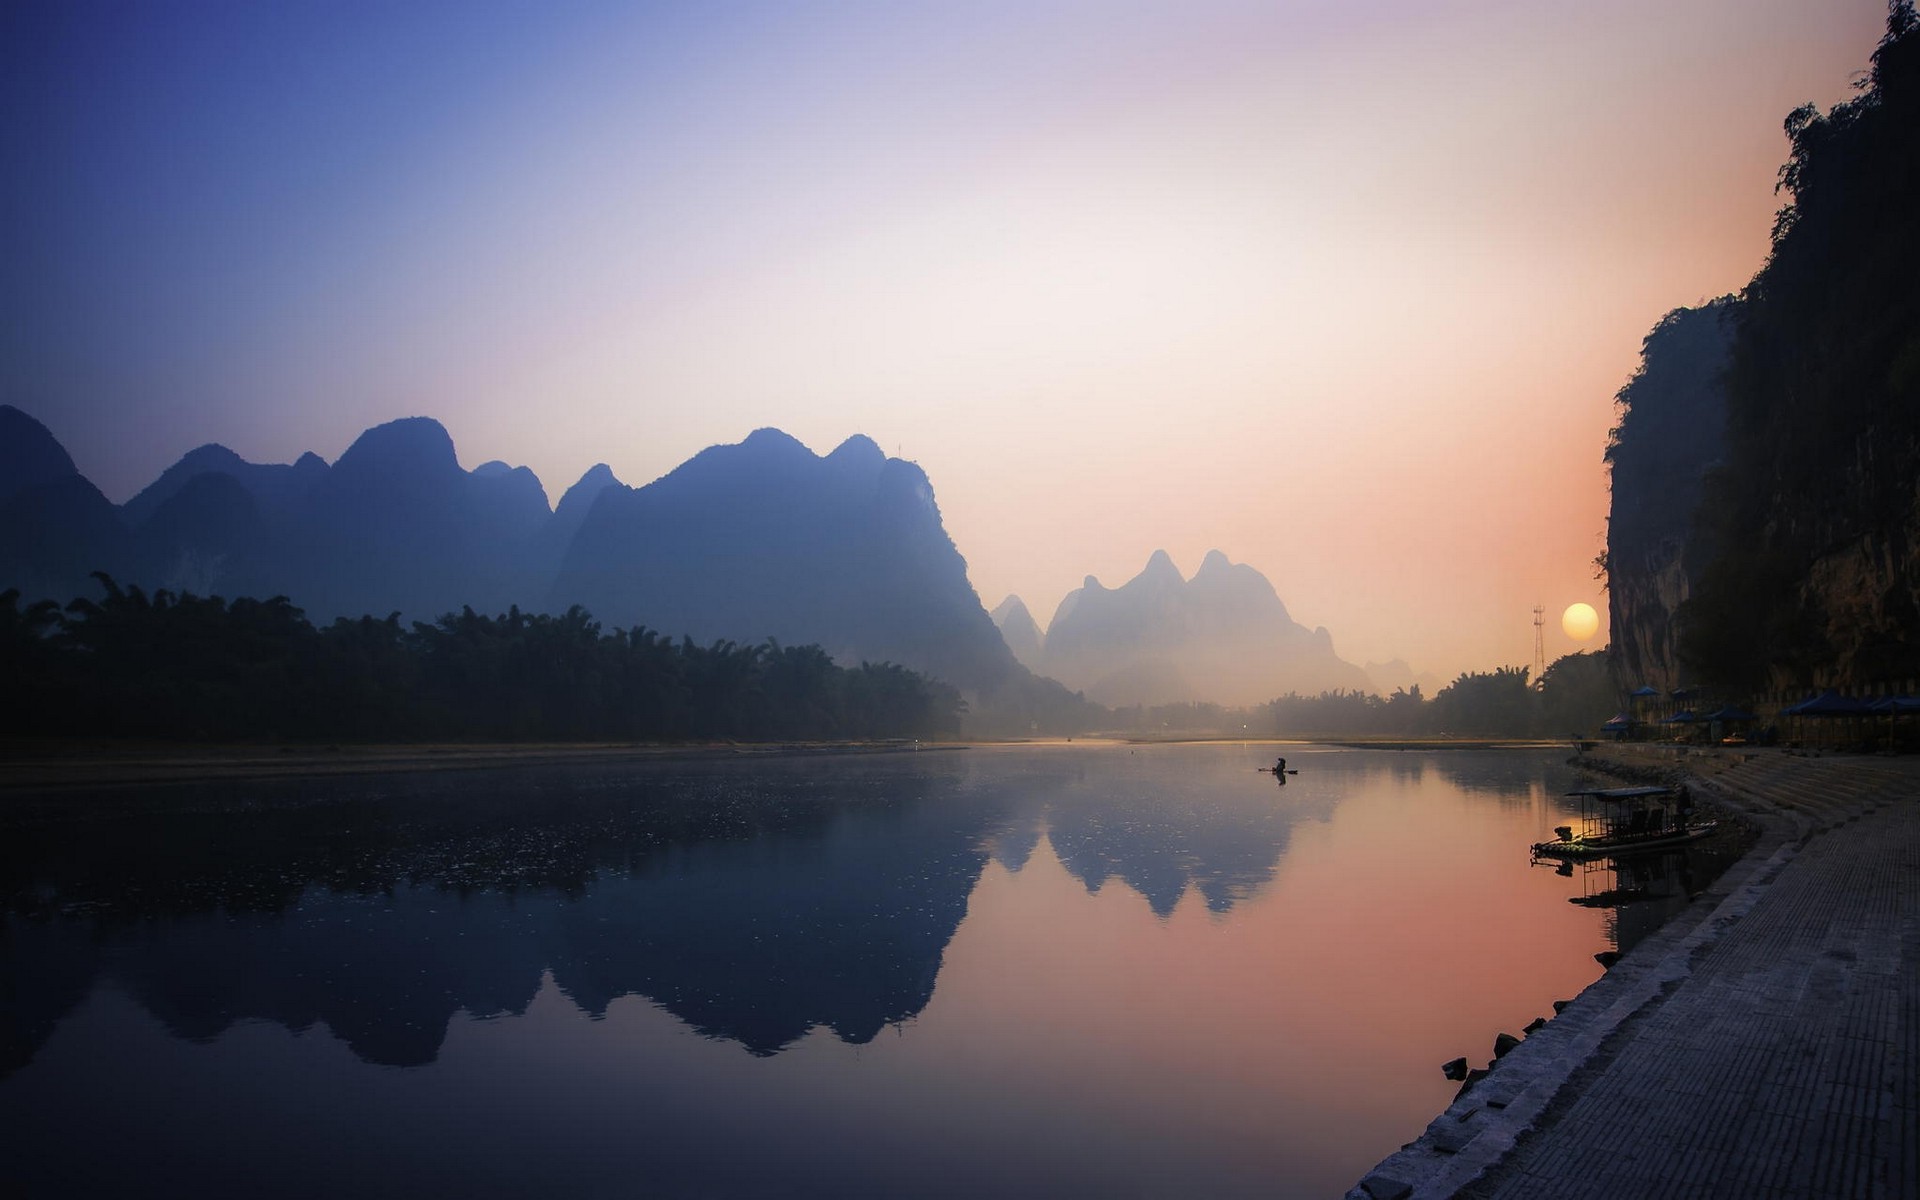 nature, Landscape, Reflection, River, Mountain, Sunrise, Mist, China, Palm Trees, Boat, Water, Calm Wallpaper